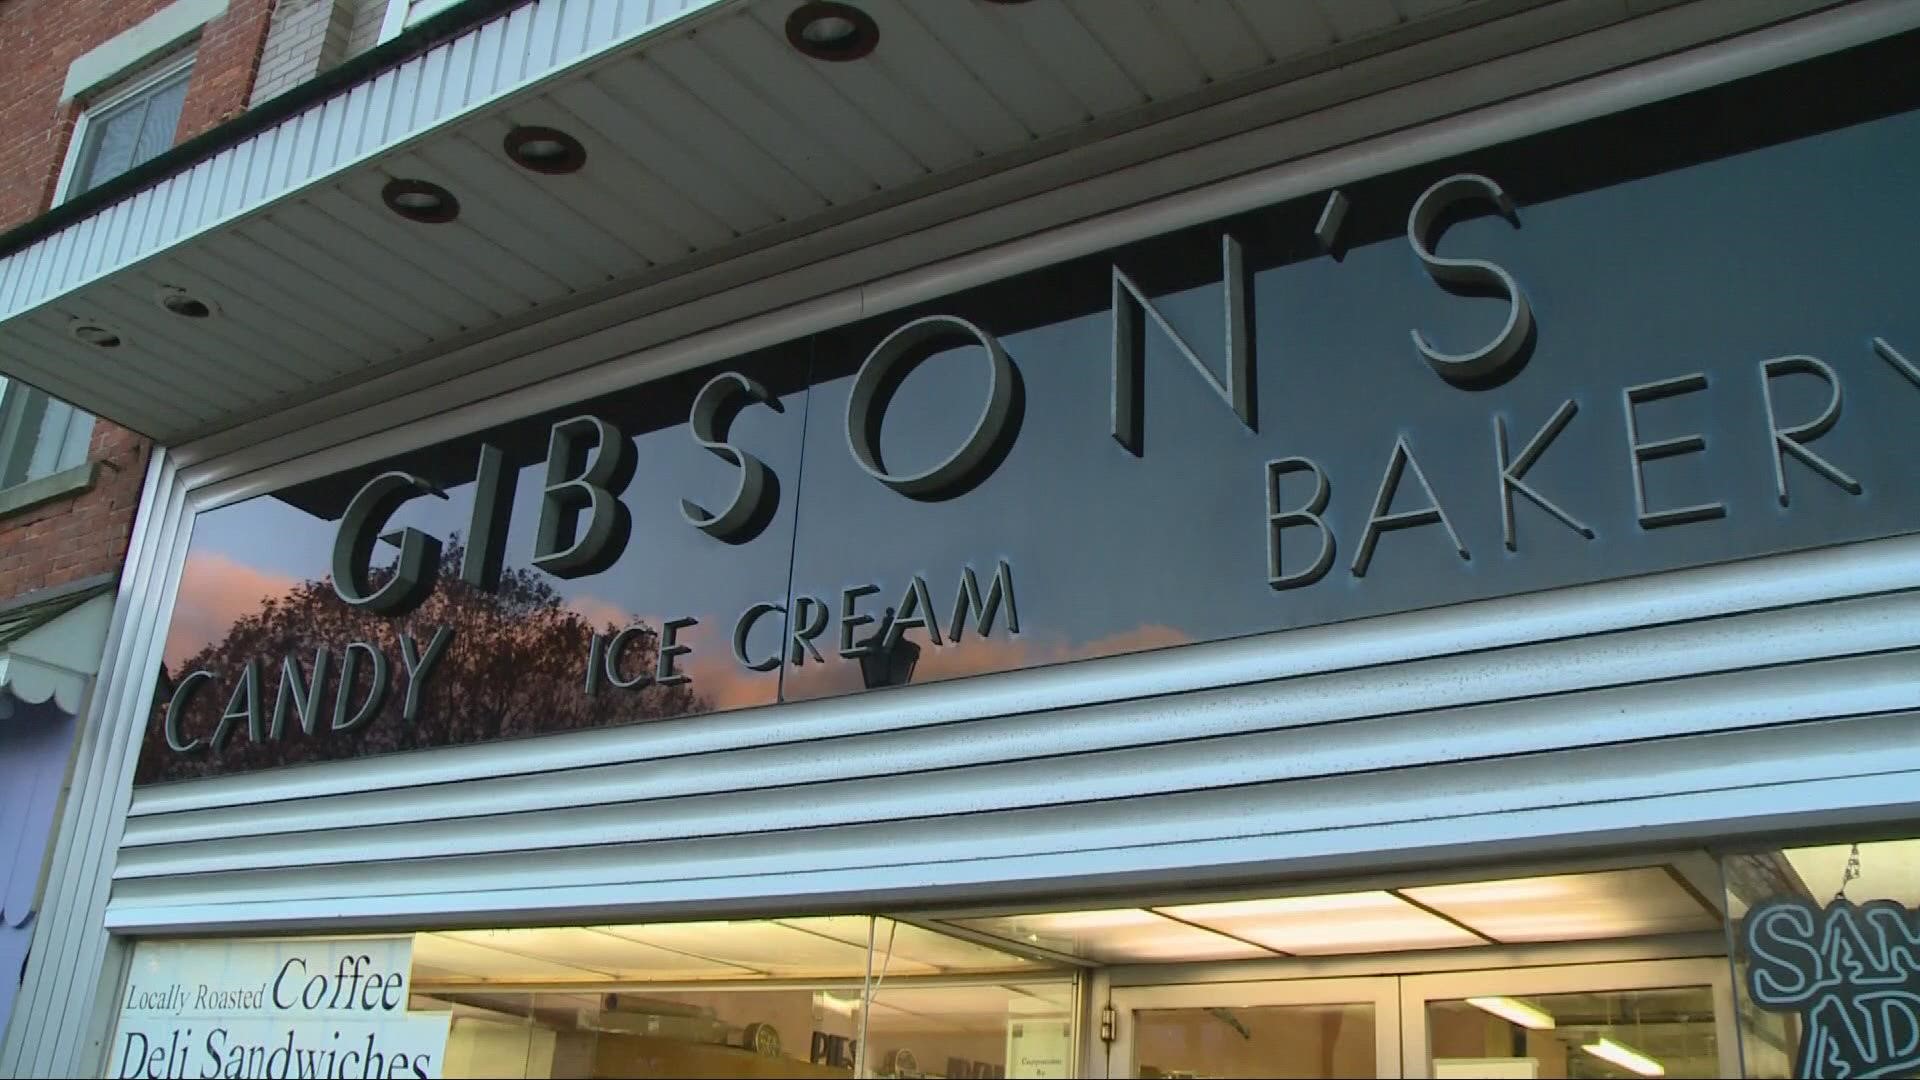 Oberlin College was ordered to pay $25 million to the owners of Gibson's Bakery. They accused the college of ruining their business by branding them as racists.